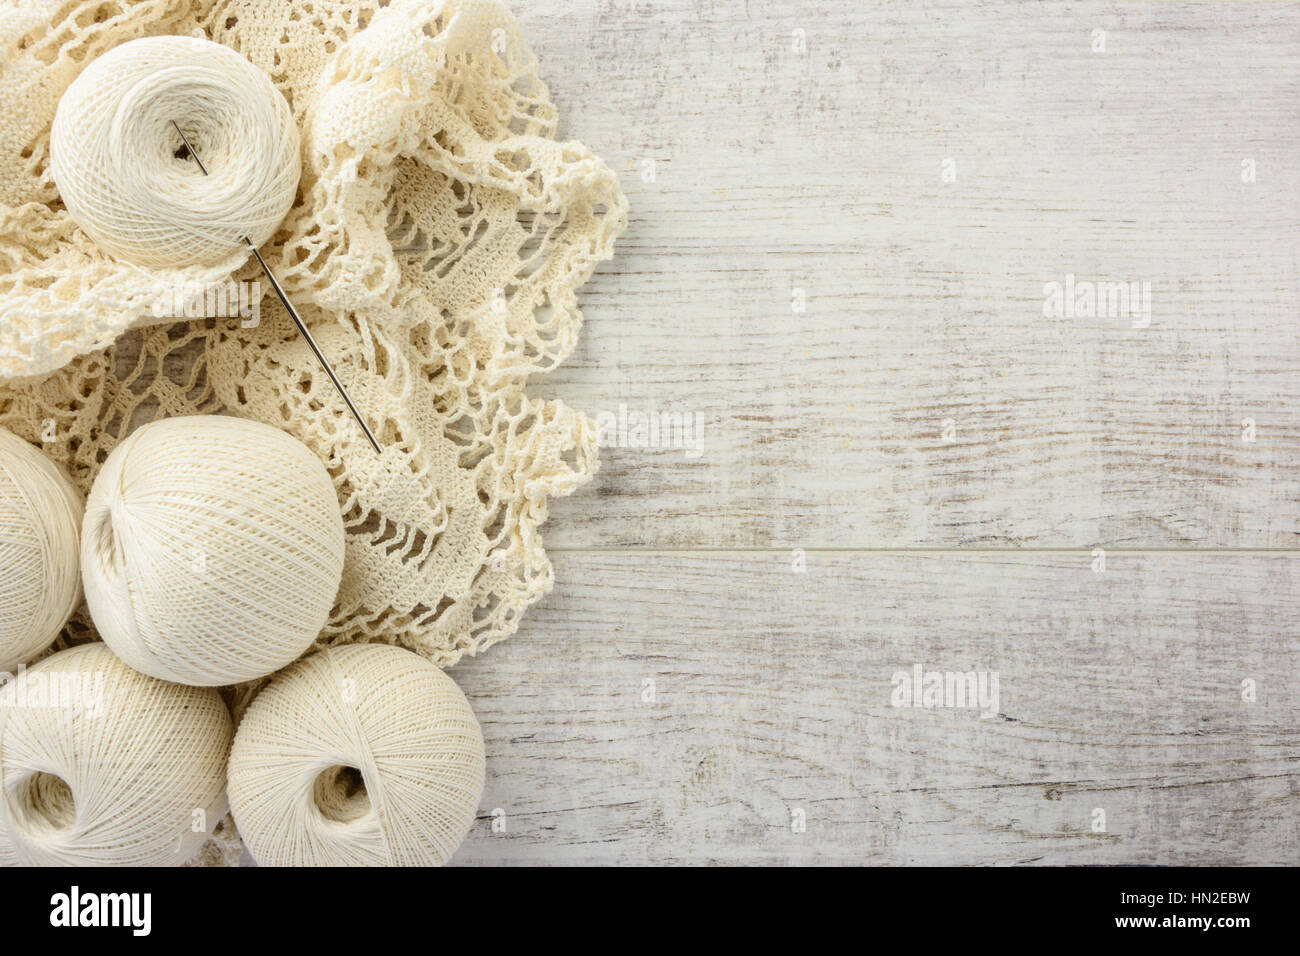 crochet tablecloth, crochet hooks and balls of cotton thread on a white wooden table. top view, copy space Stock Photo